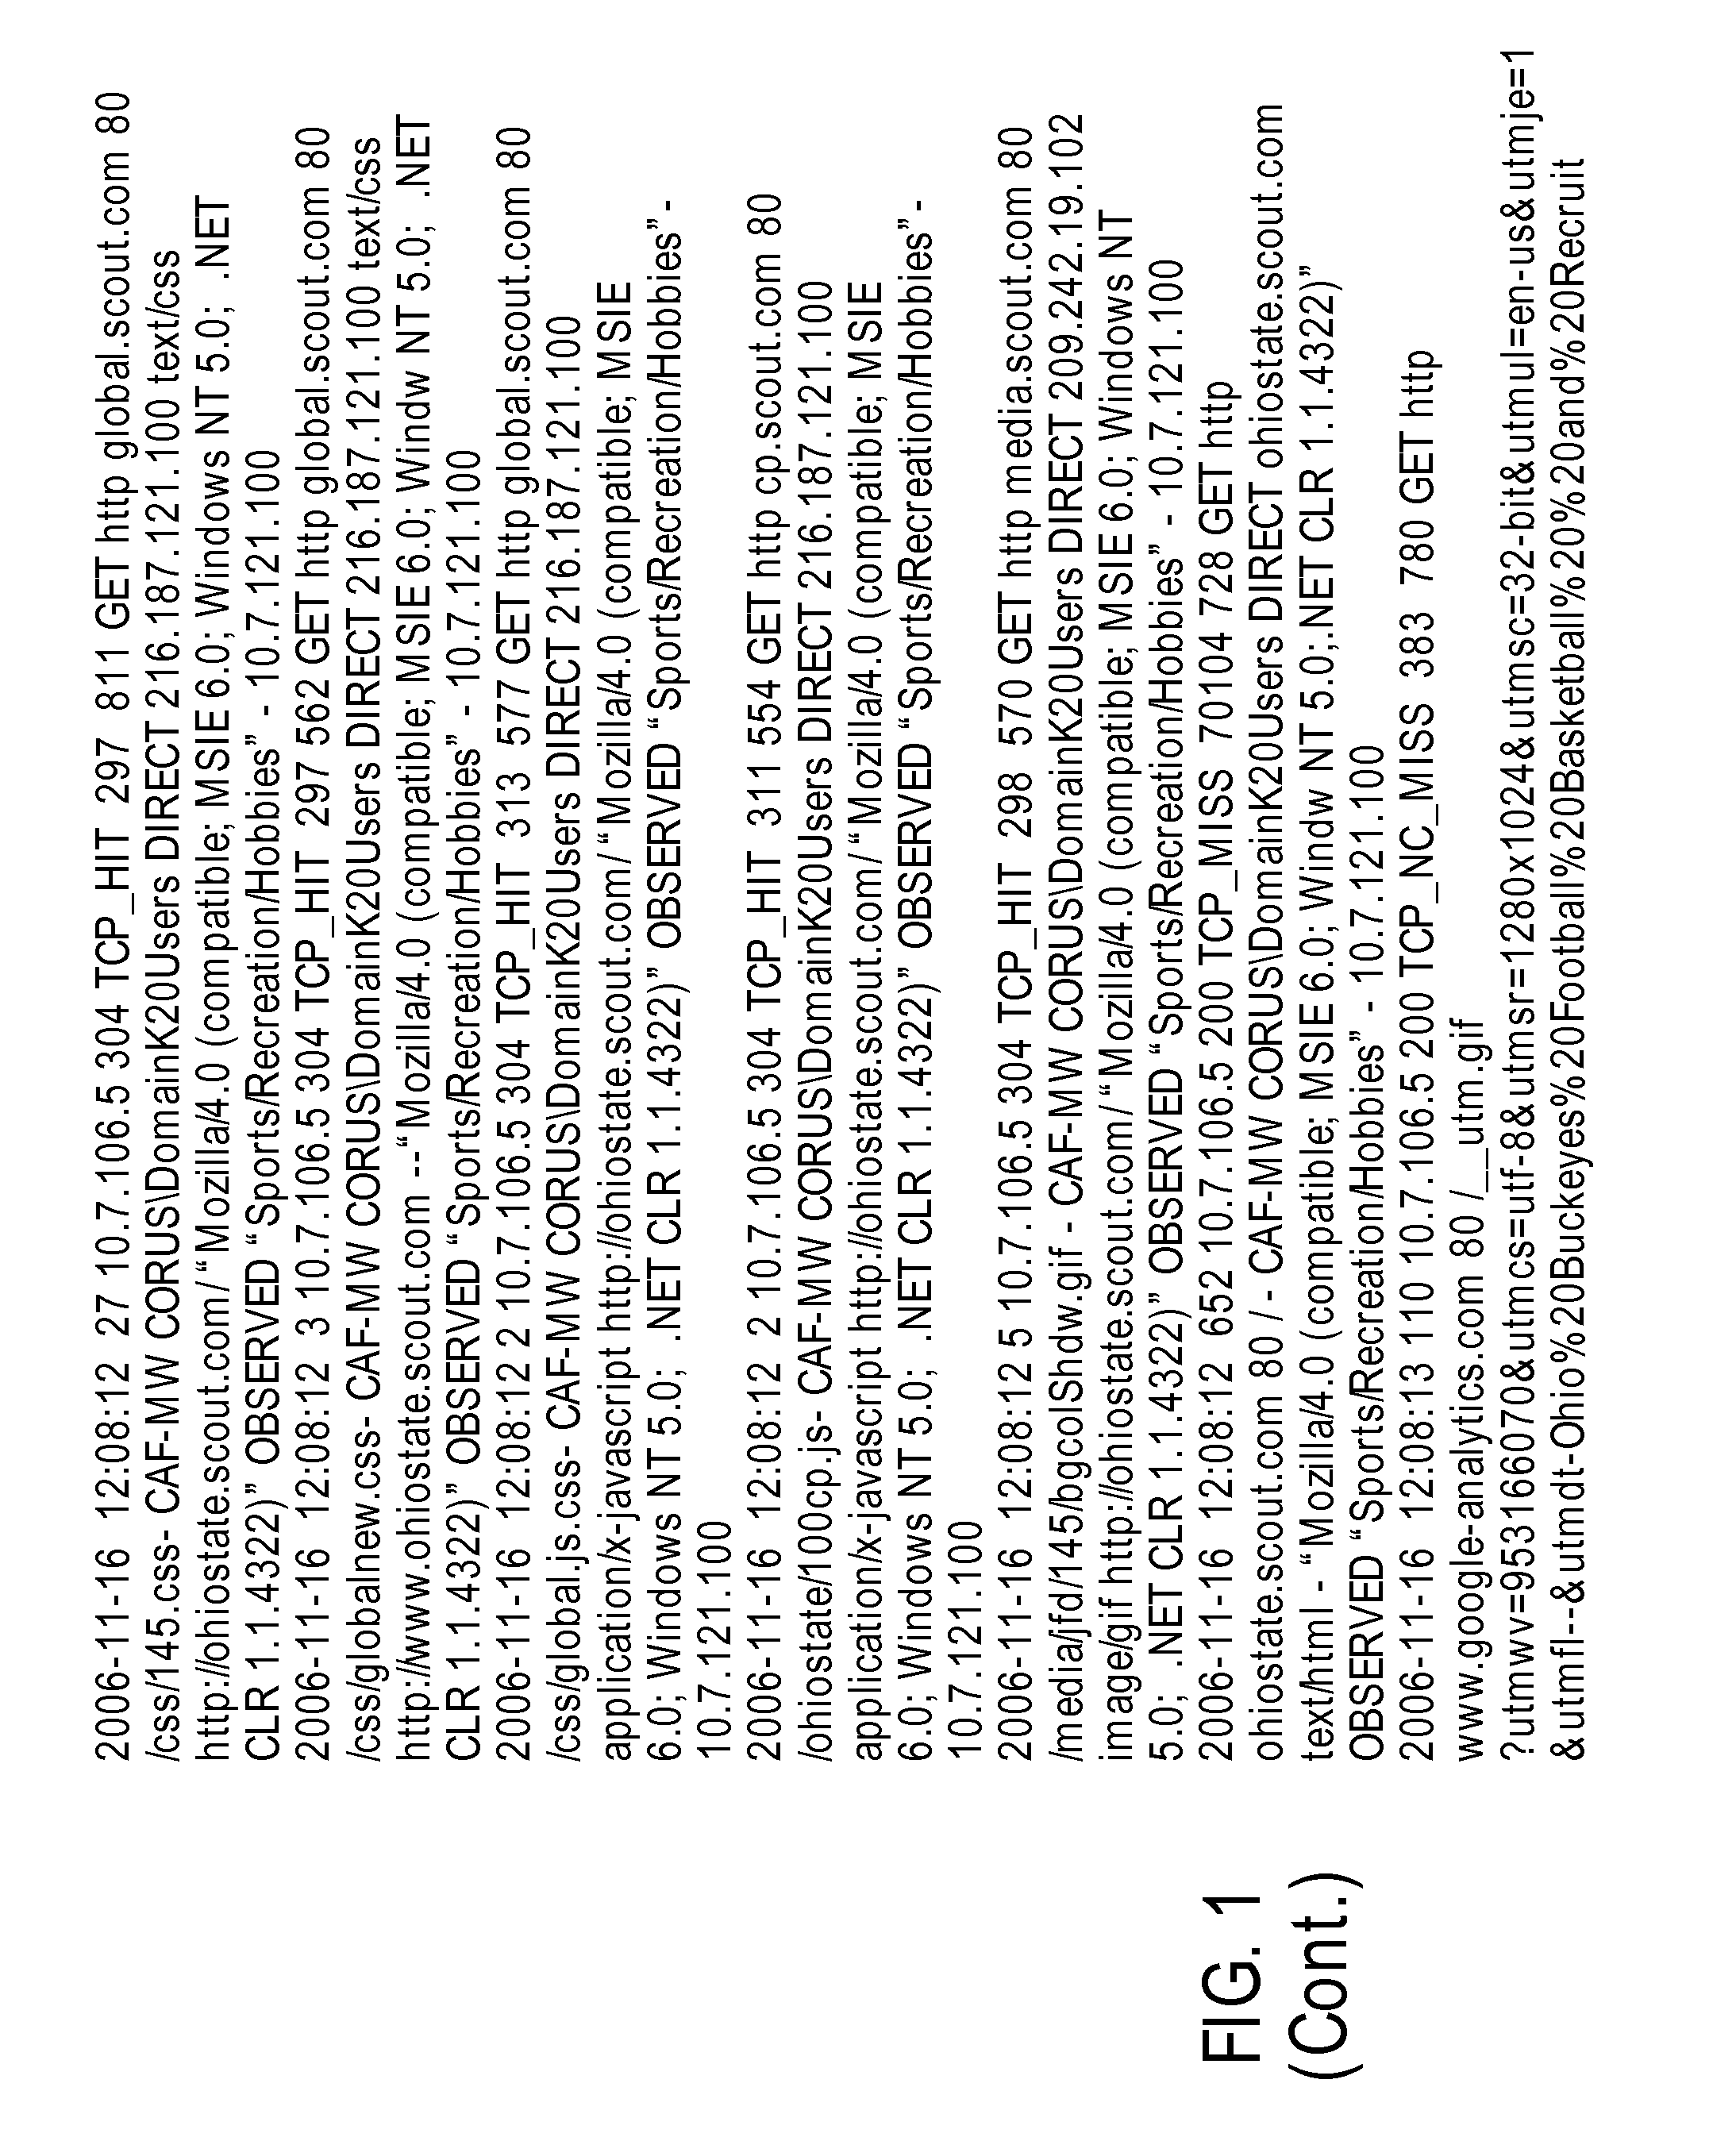 System and method for conducting network analytics